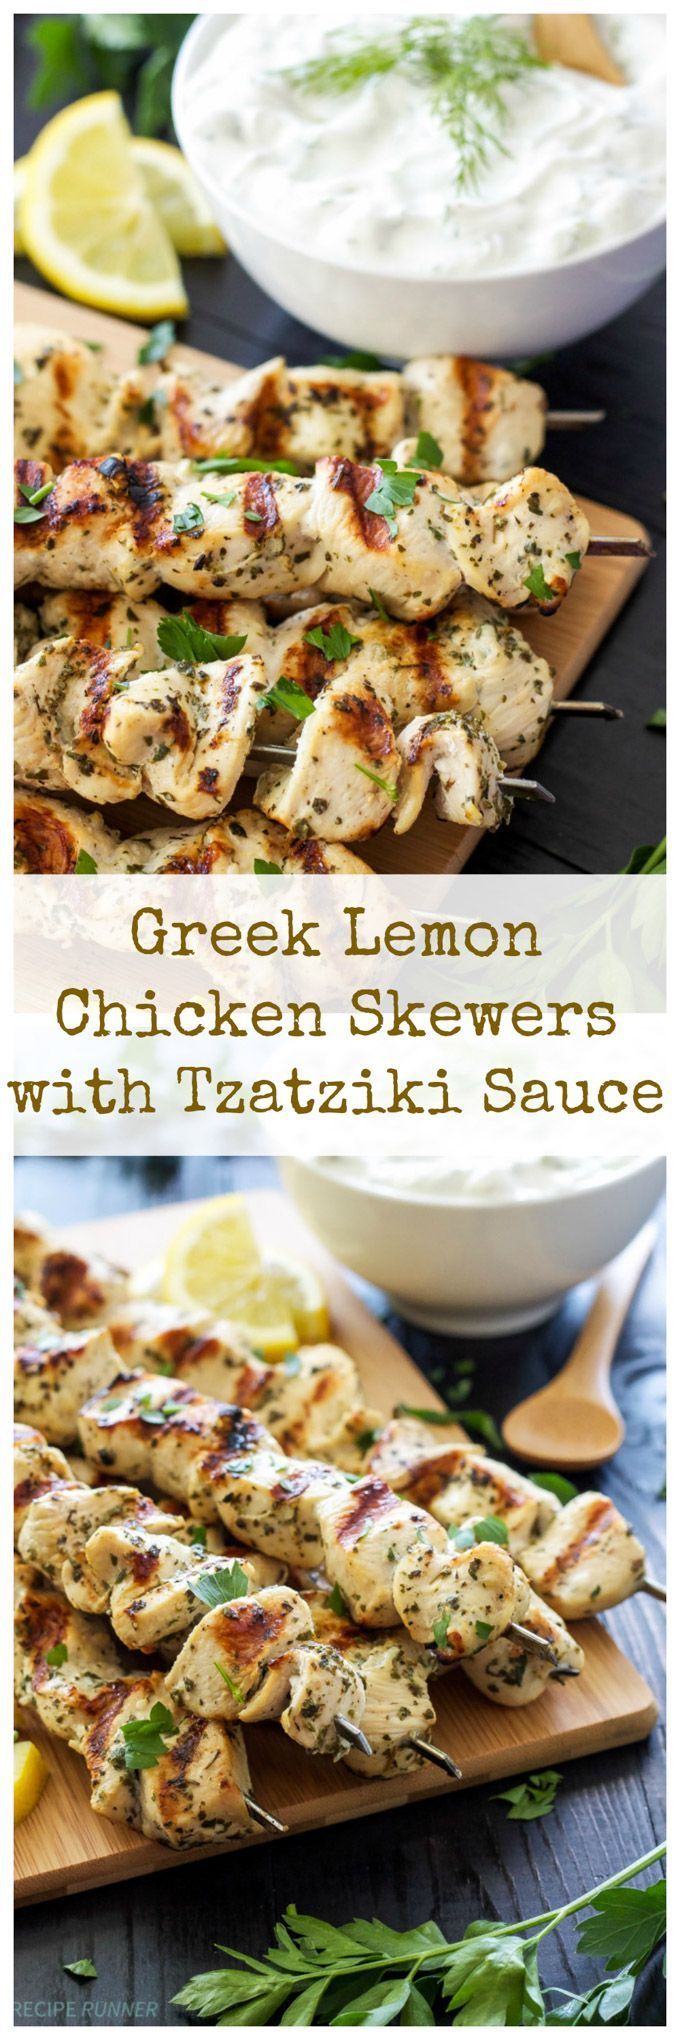 Greek Lemon Chicken Skewers with Tzatziki Sauce | Delicious and healthy Greek chicken skewers with a sauce youll want to slather